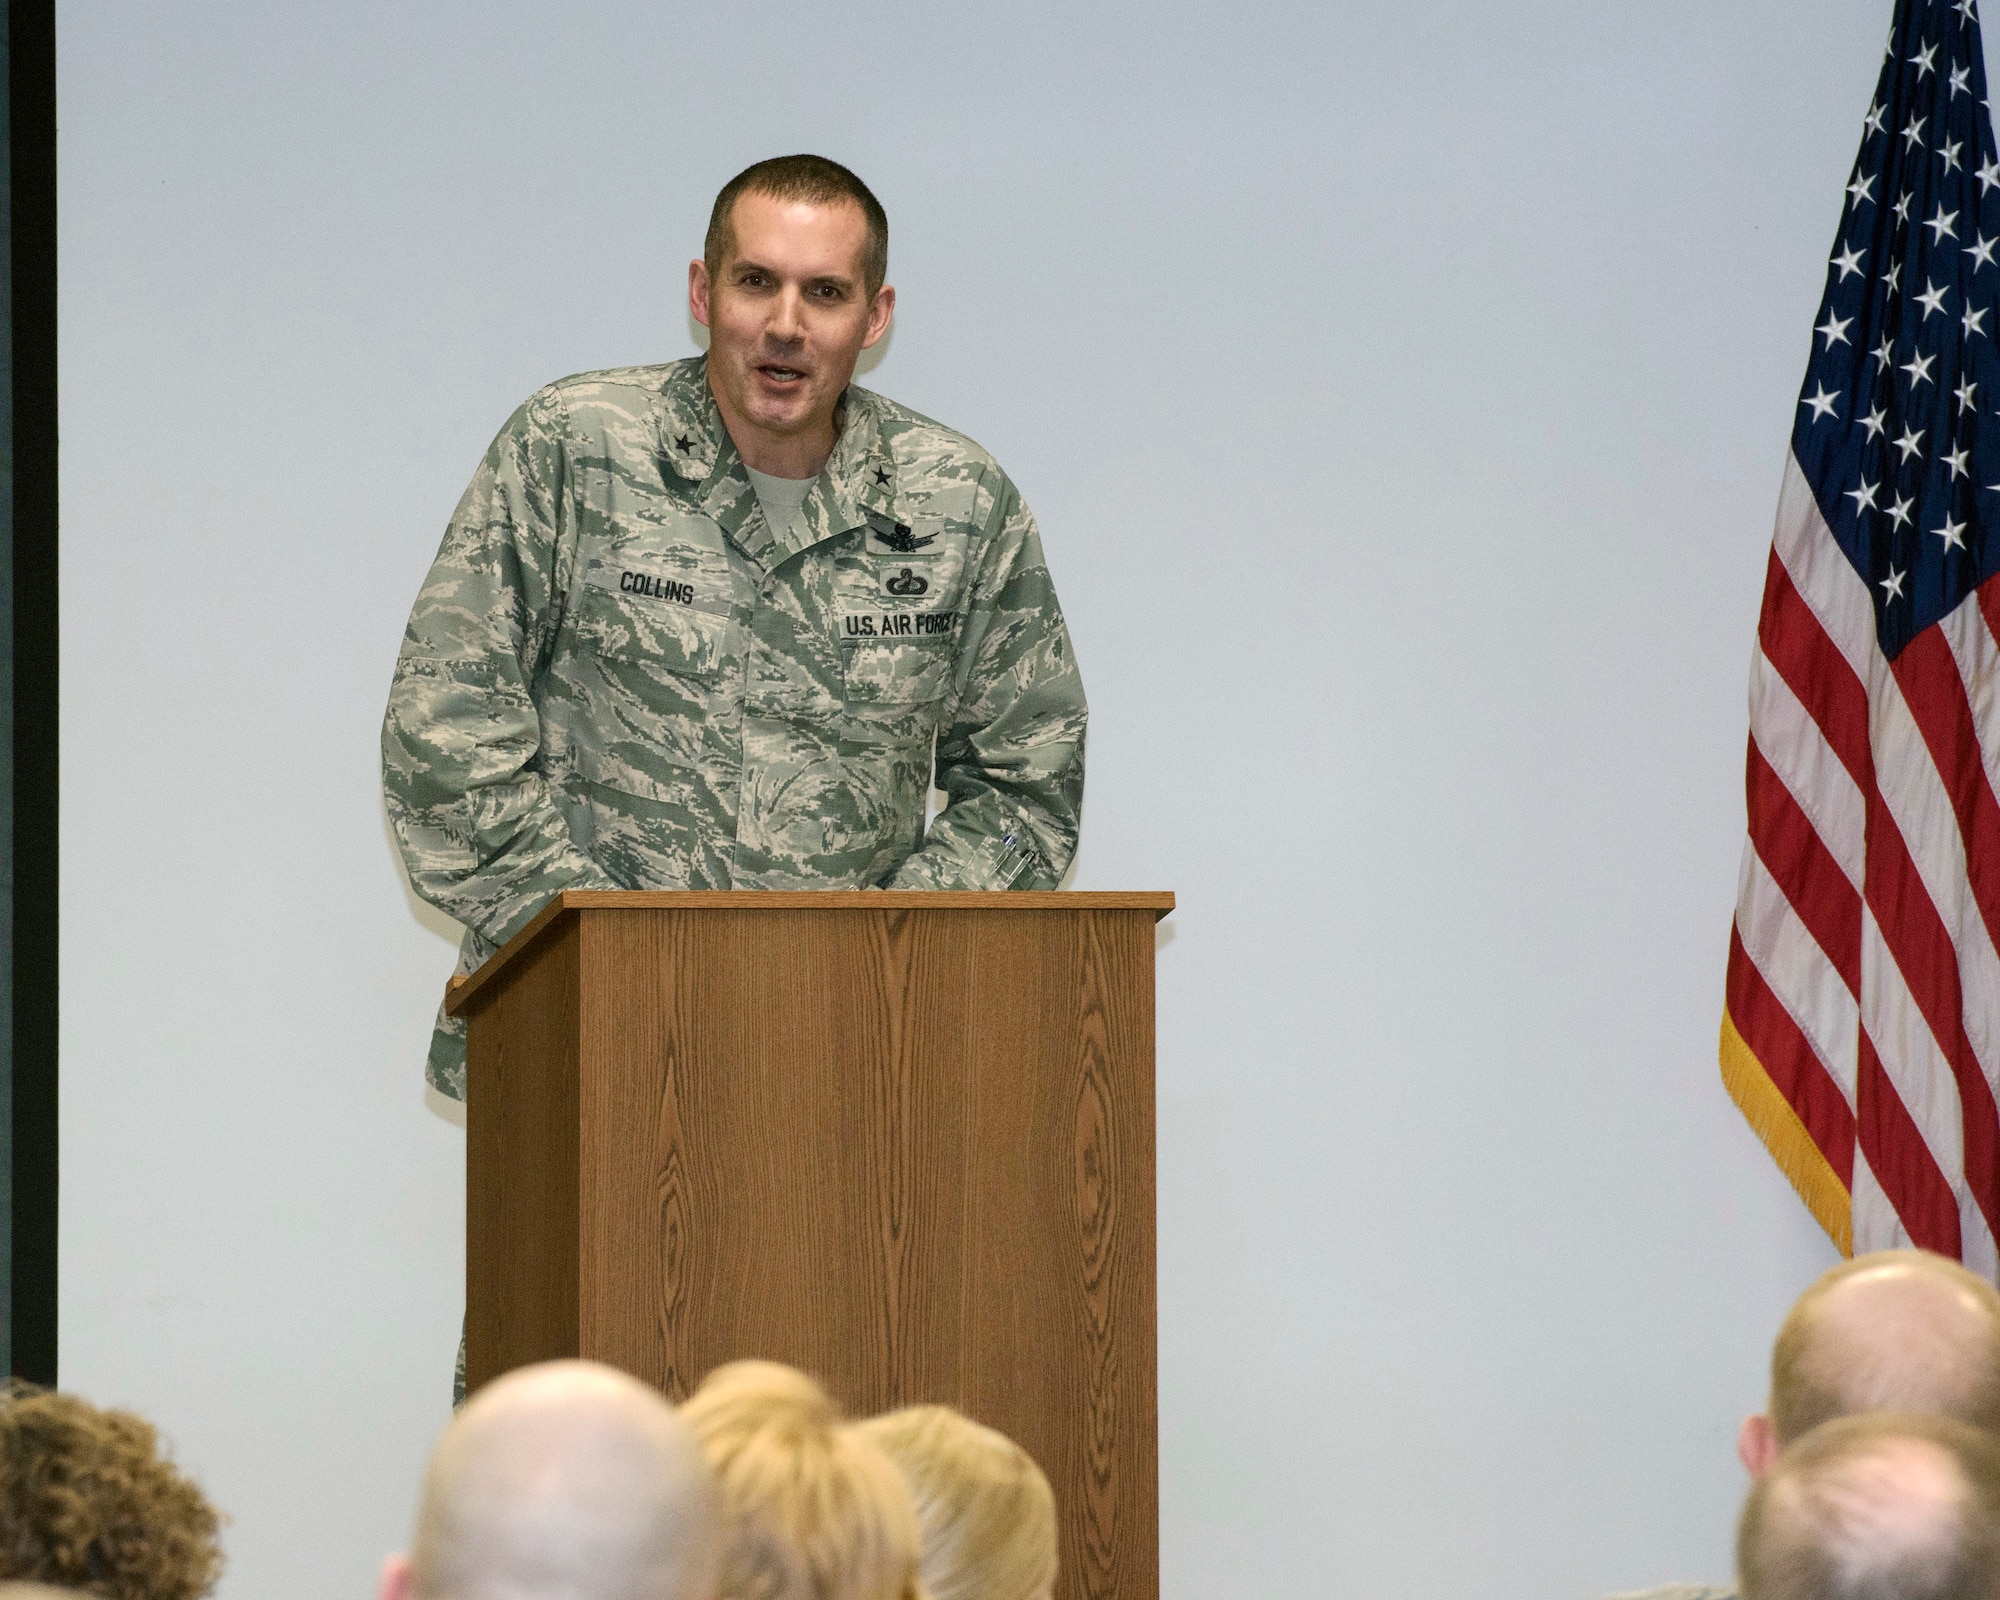 Brig. Gen. Heath Collins, the new Program Executive Officer for the Fighters and Bombers Directorate, addresses the crowd during a March 28 ceremony in which he assumed leadership of the directorate. (U.S. Air Force photo / Michelle Gigante)